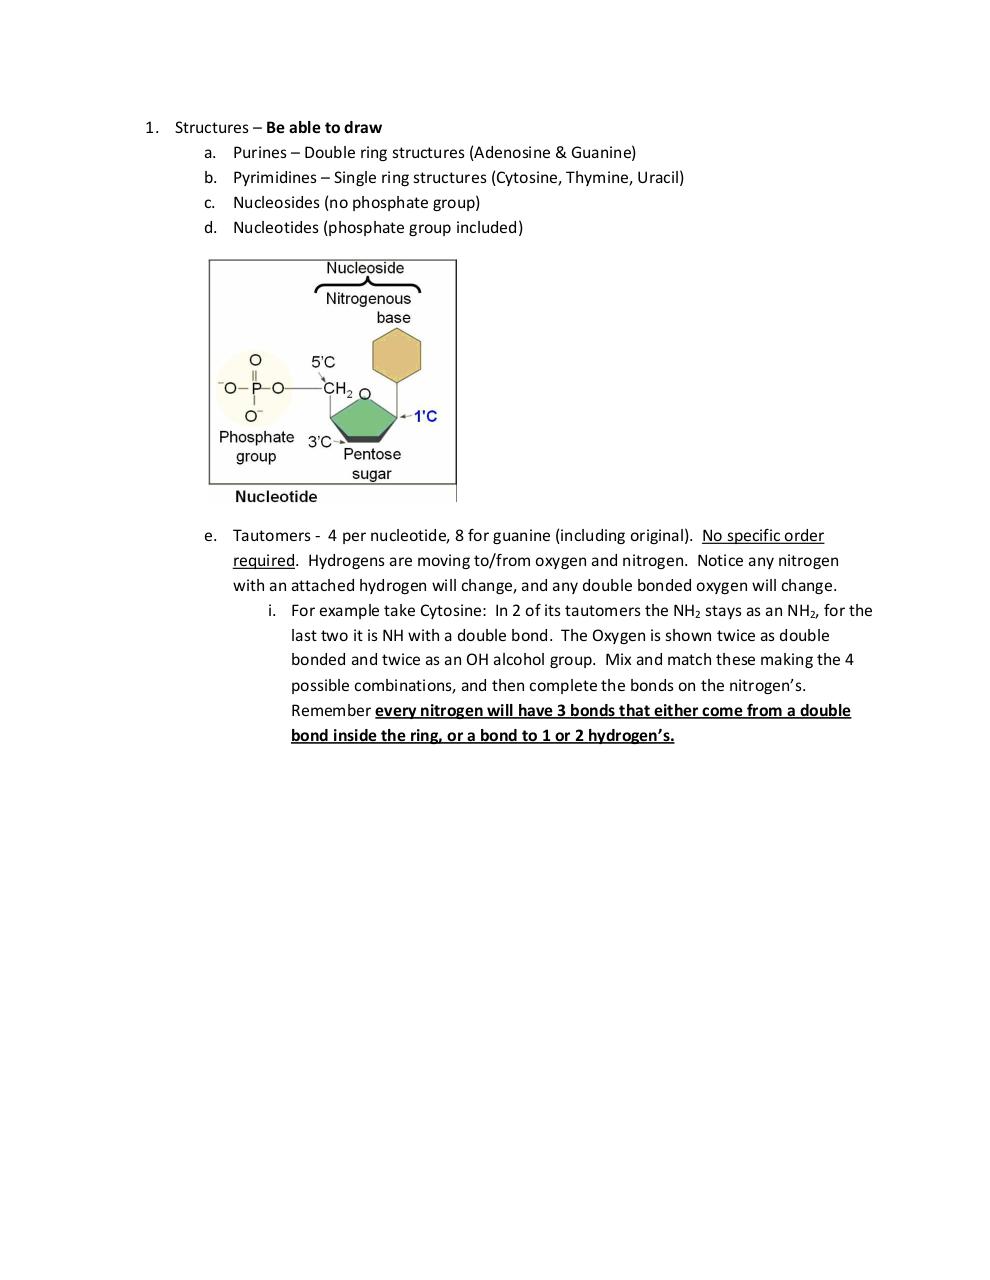 Nucleic Acids Skillz Study Guide.pdf - page 1/10